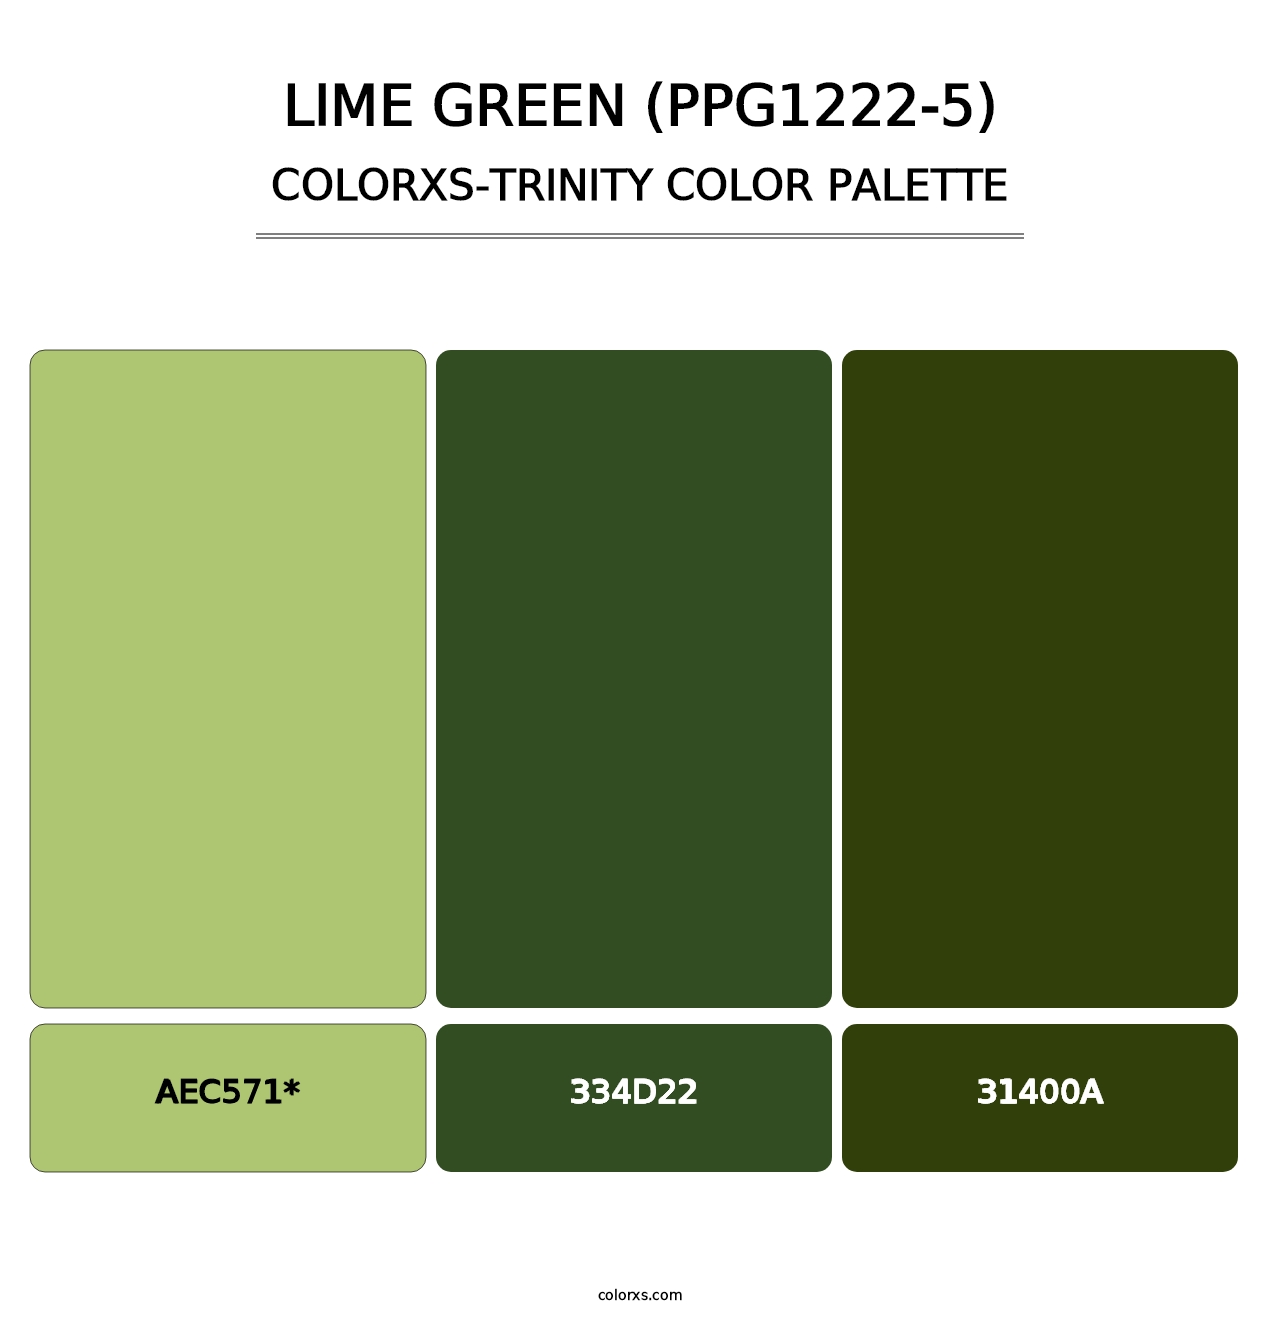 Lime Green (PPG1222-5) - Colorxs Trinity Palette